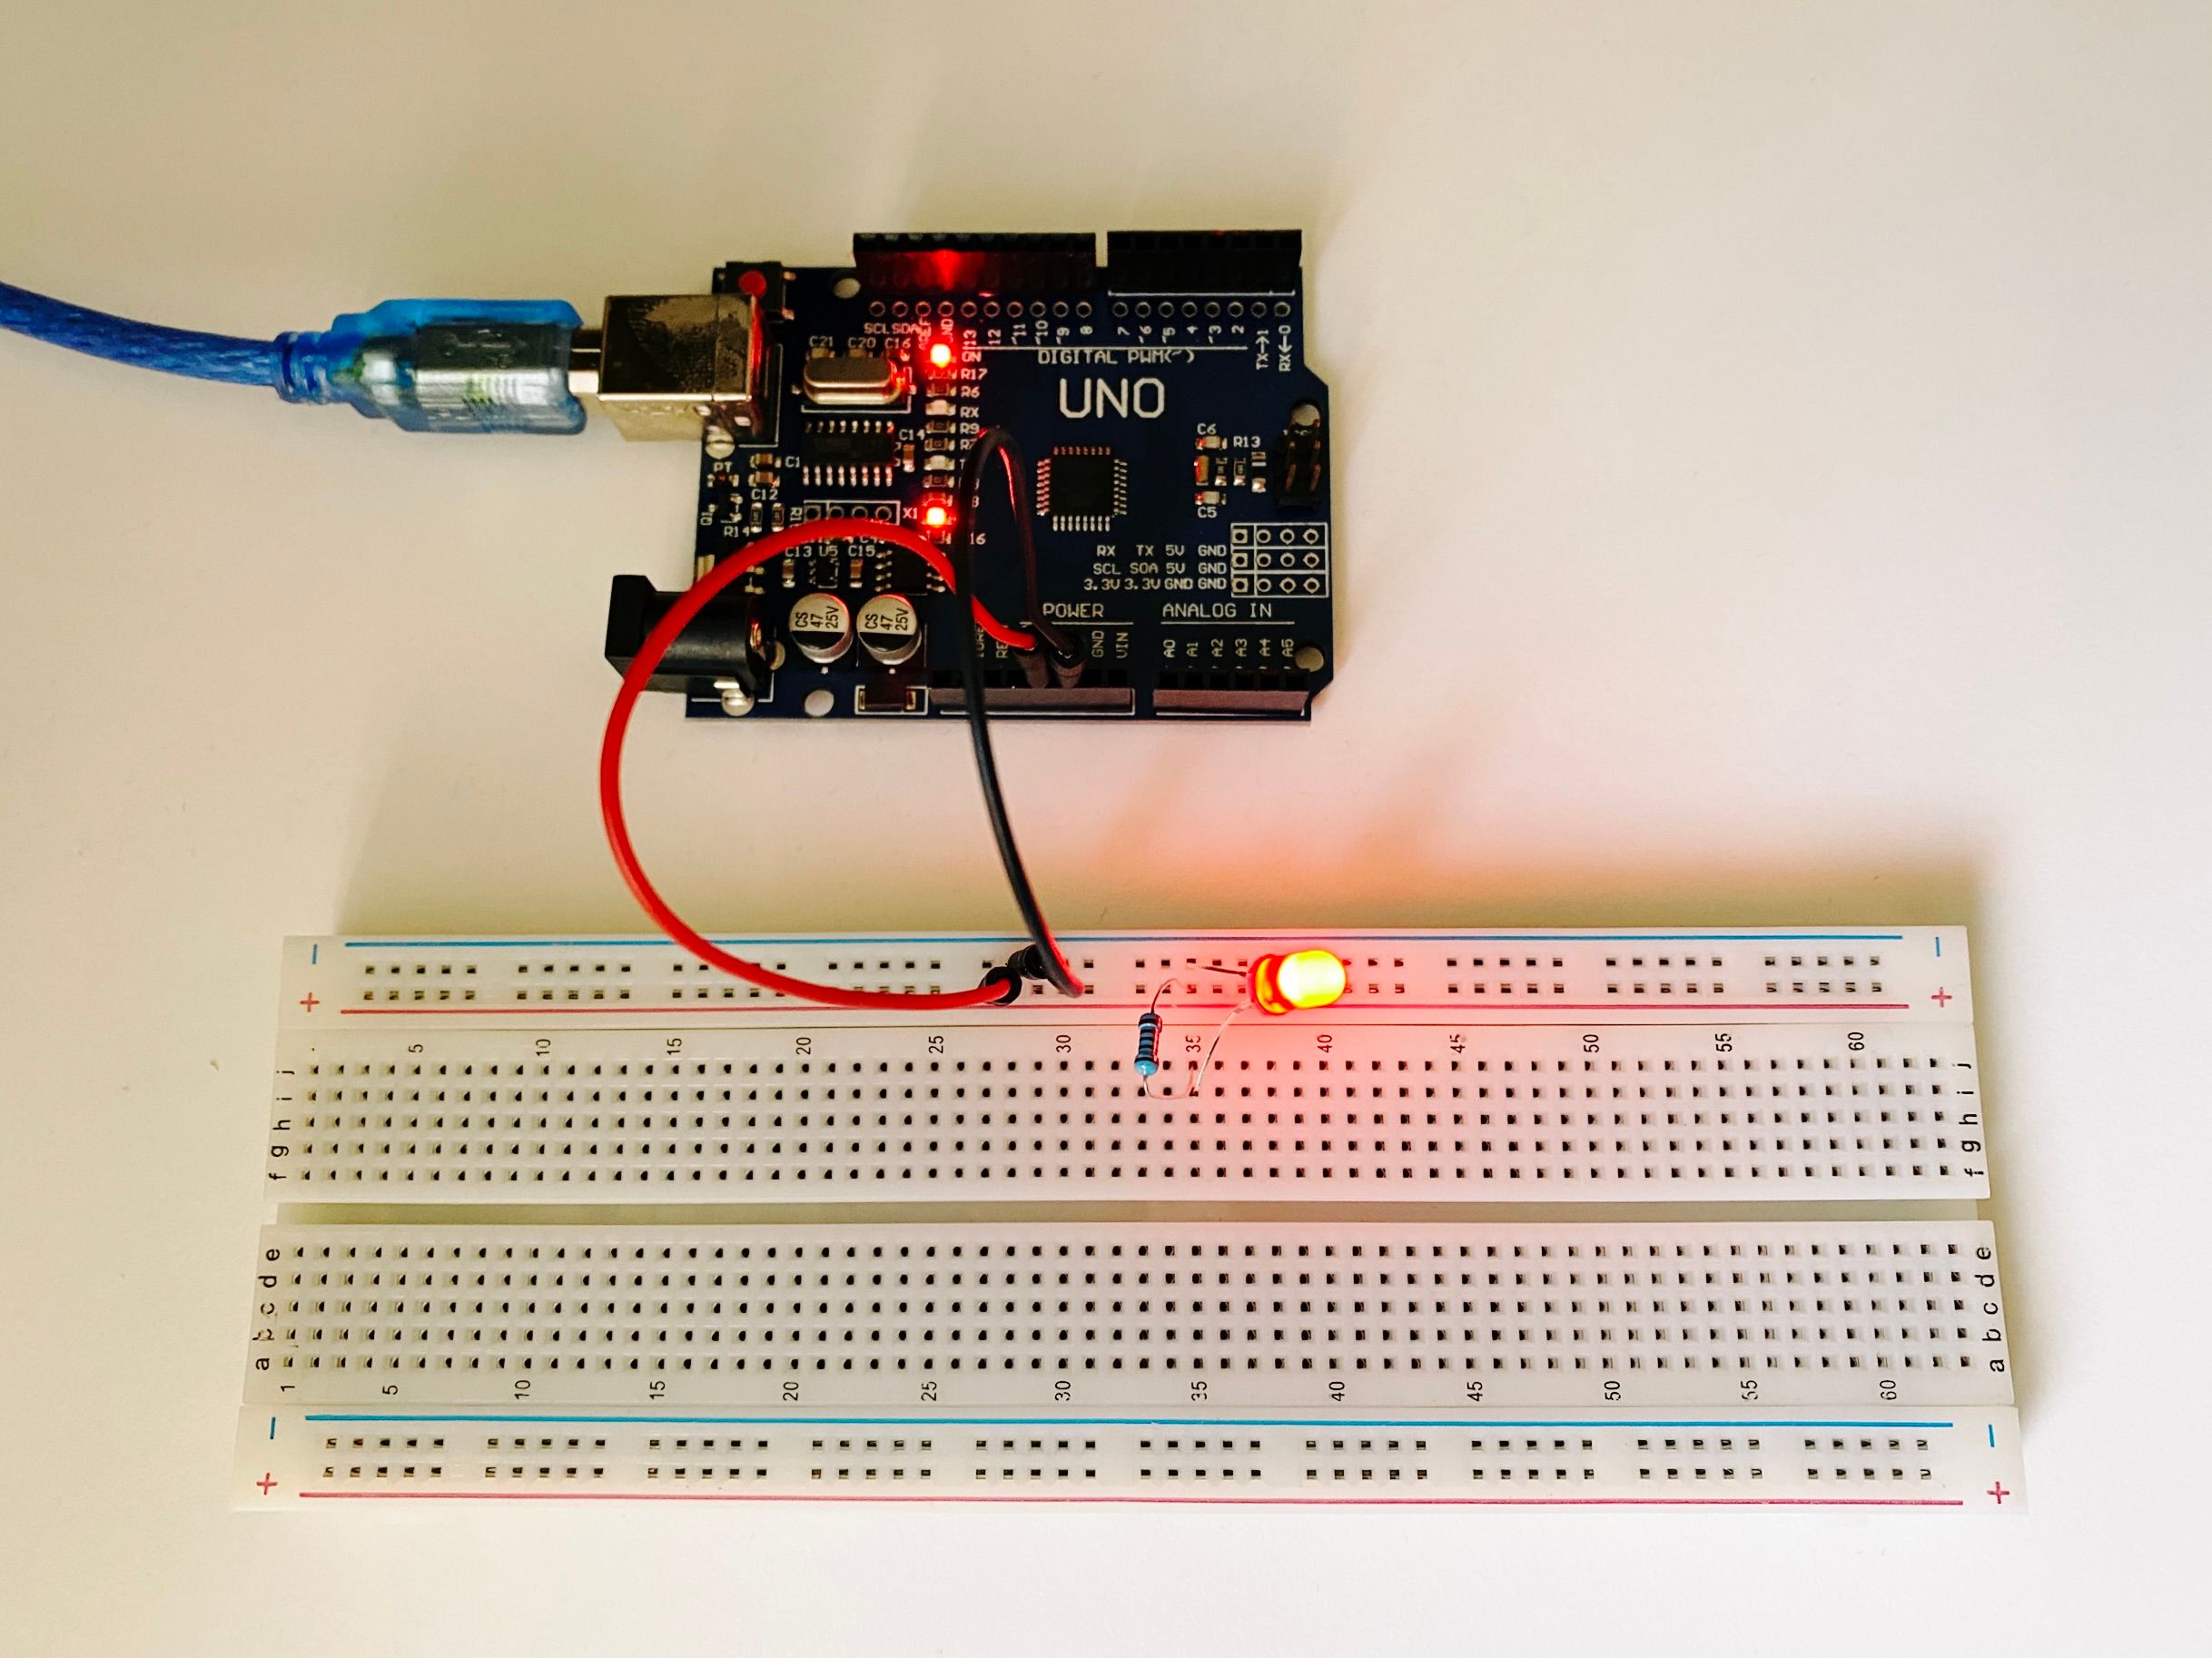 A photo of an Arduino connected to a breadboard that has a resistor and a red LED plugged into it. The LED is lit up.